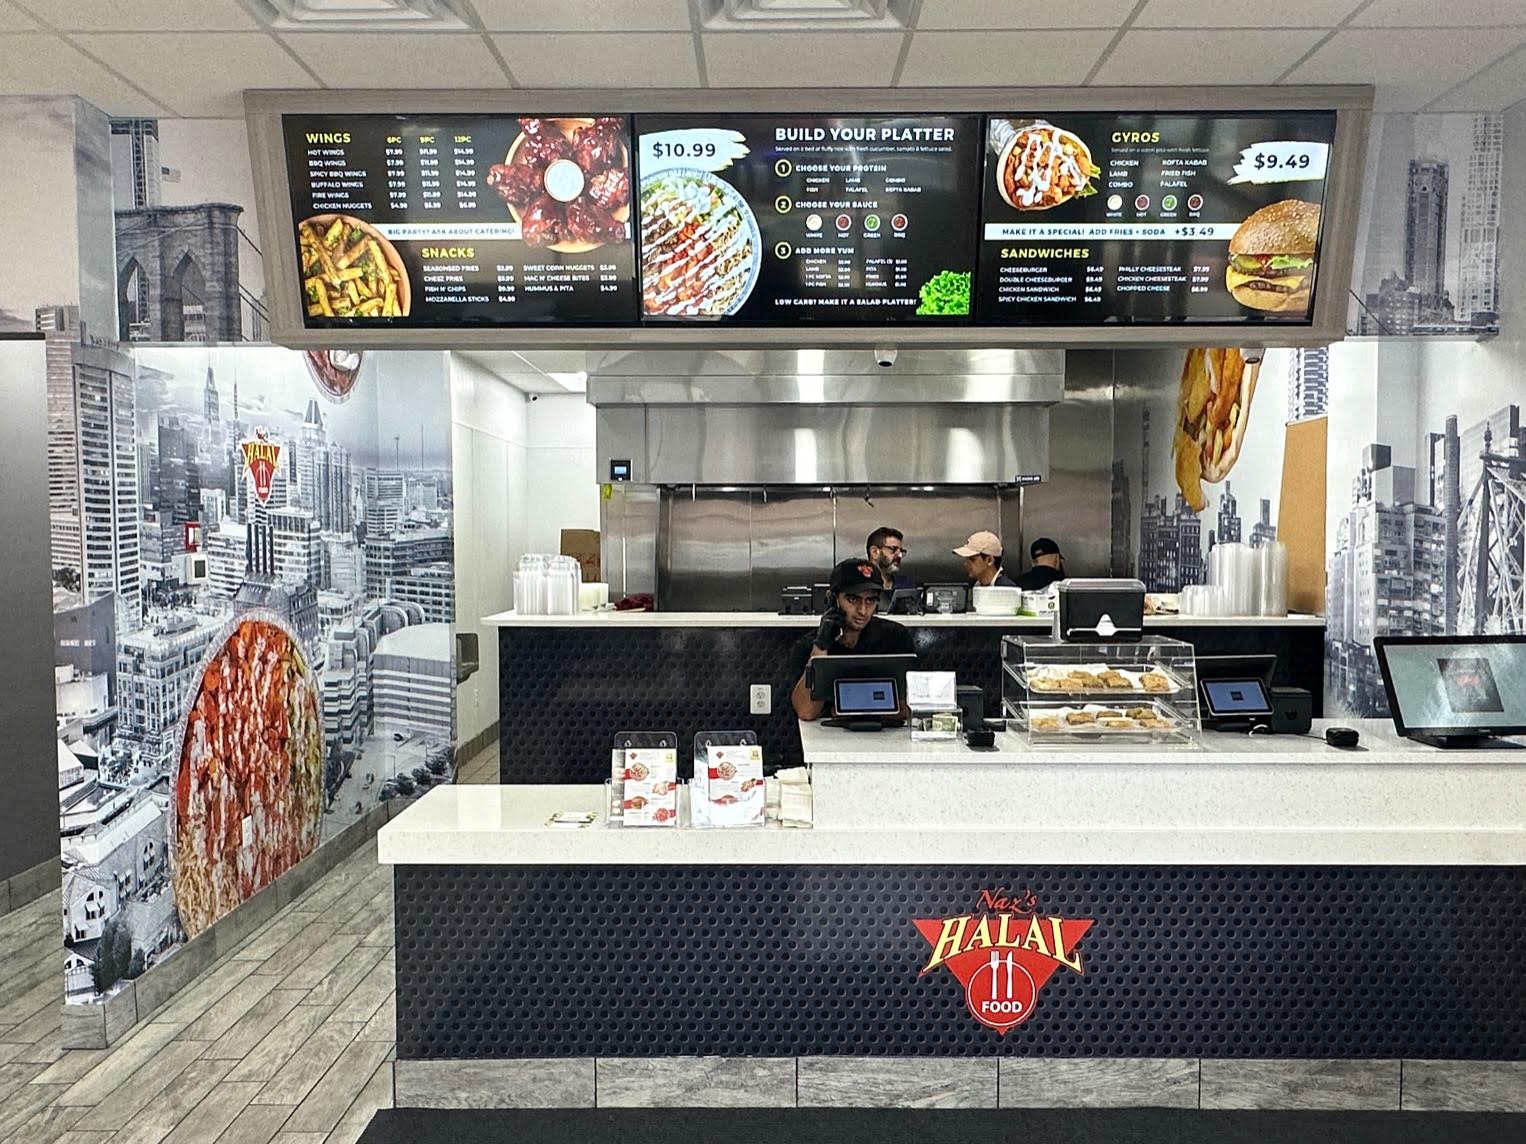 Naz's Halal officially opens first Loudoun County location